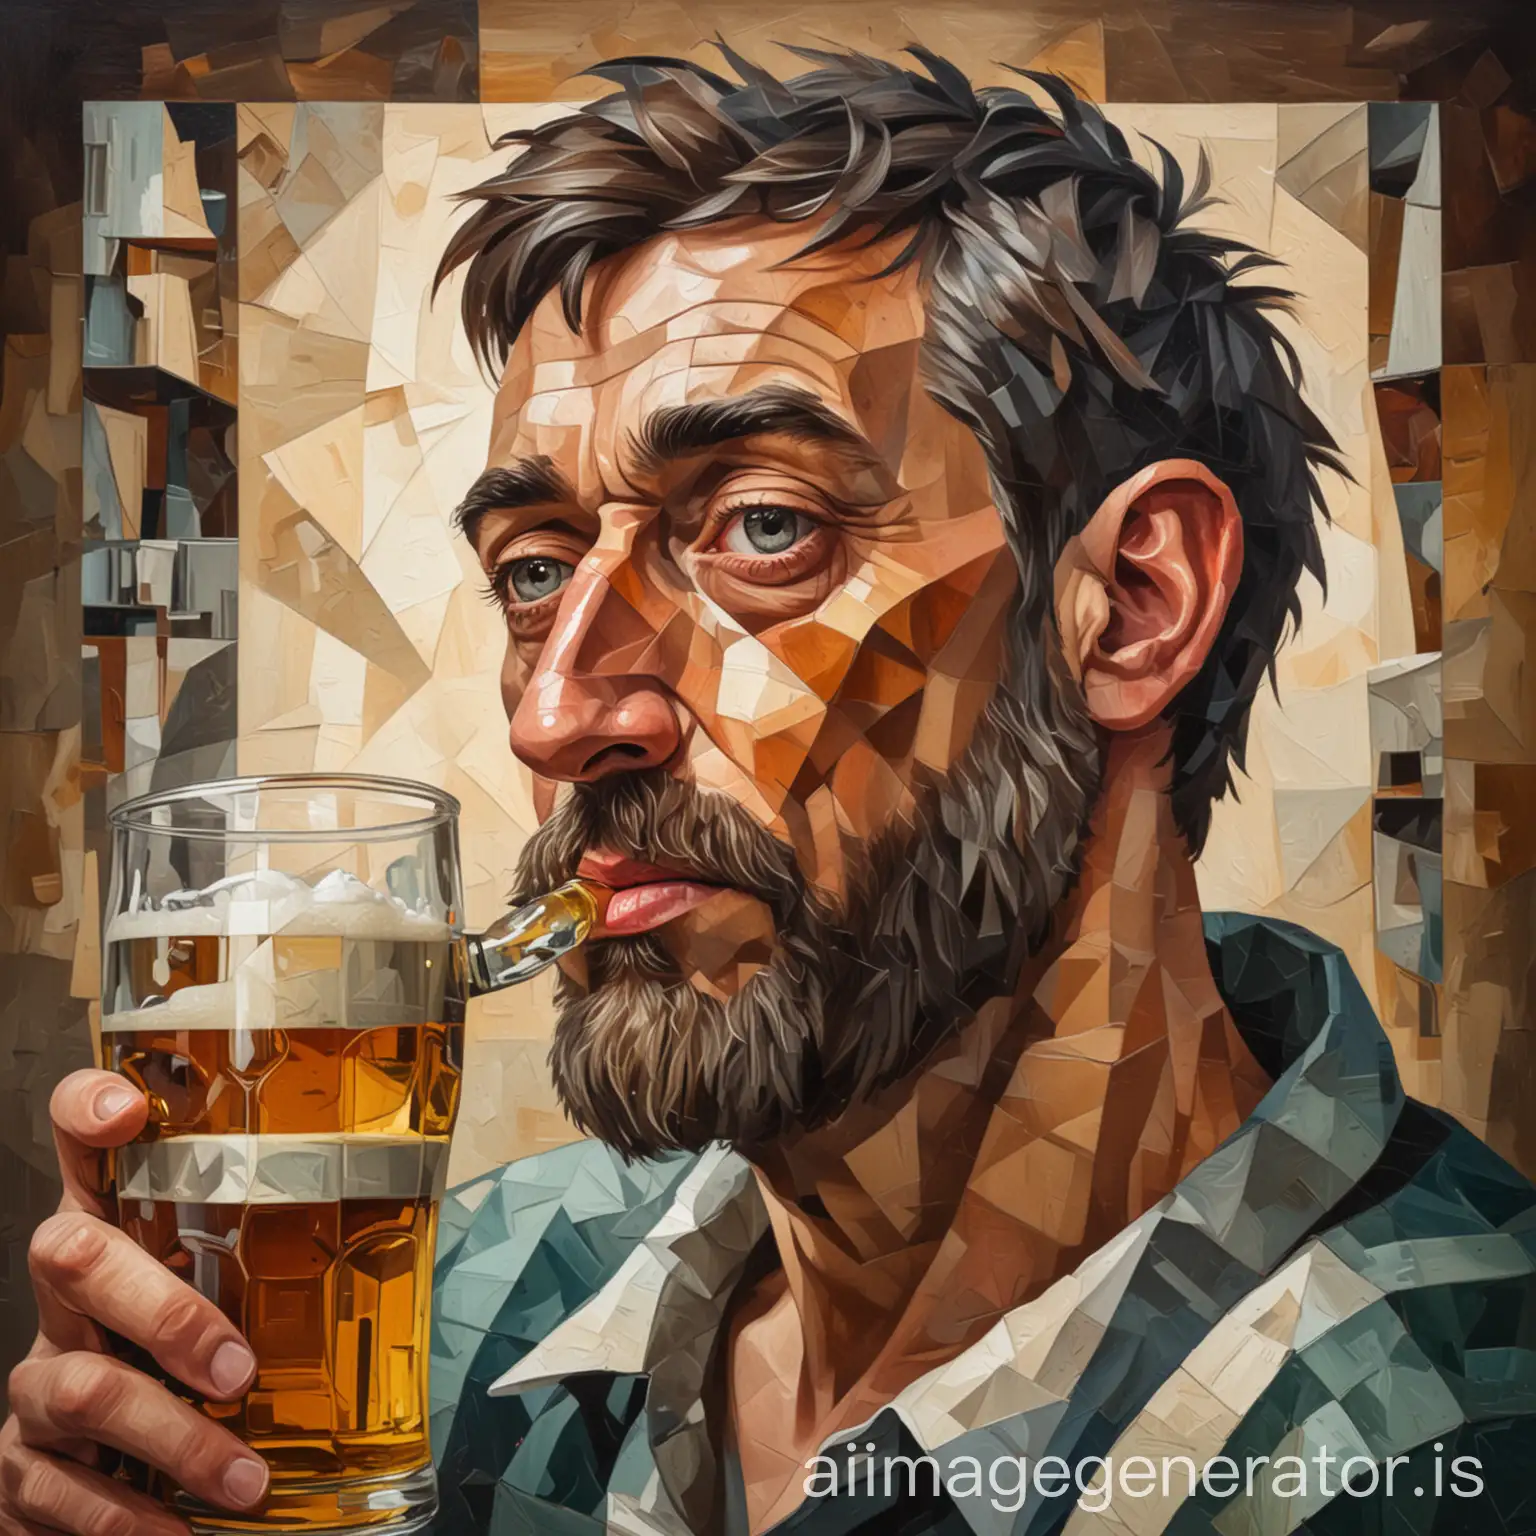 Person-Enjoying-Beer-in-Cubist-Art-Style